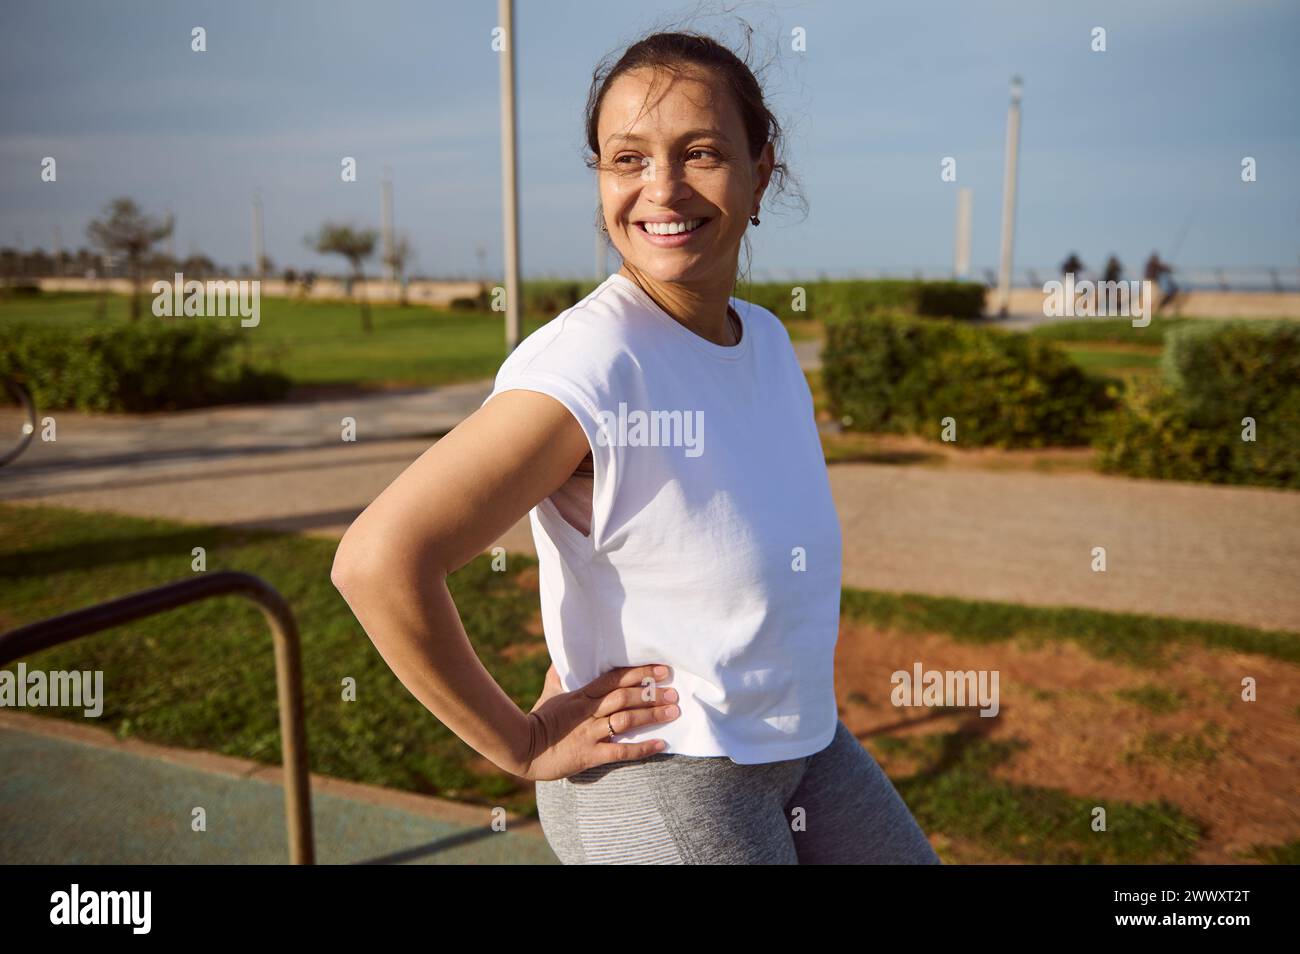 Young happy fitness woman, athlete smiling after running jogging. Authentic portrait of a beautiful sportswoman in white t-shirt, looking away, relaxi Stock Photo